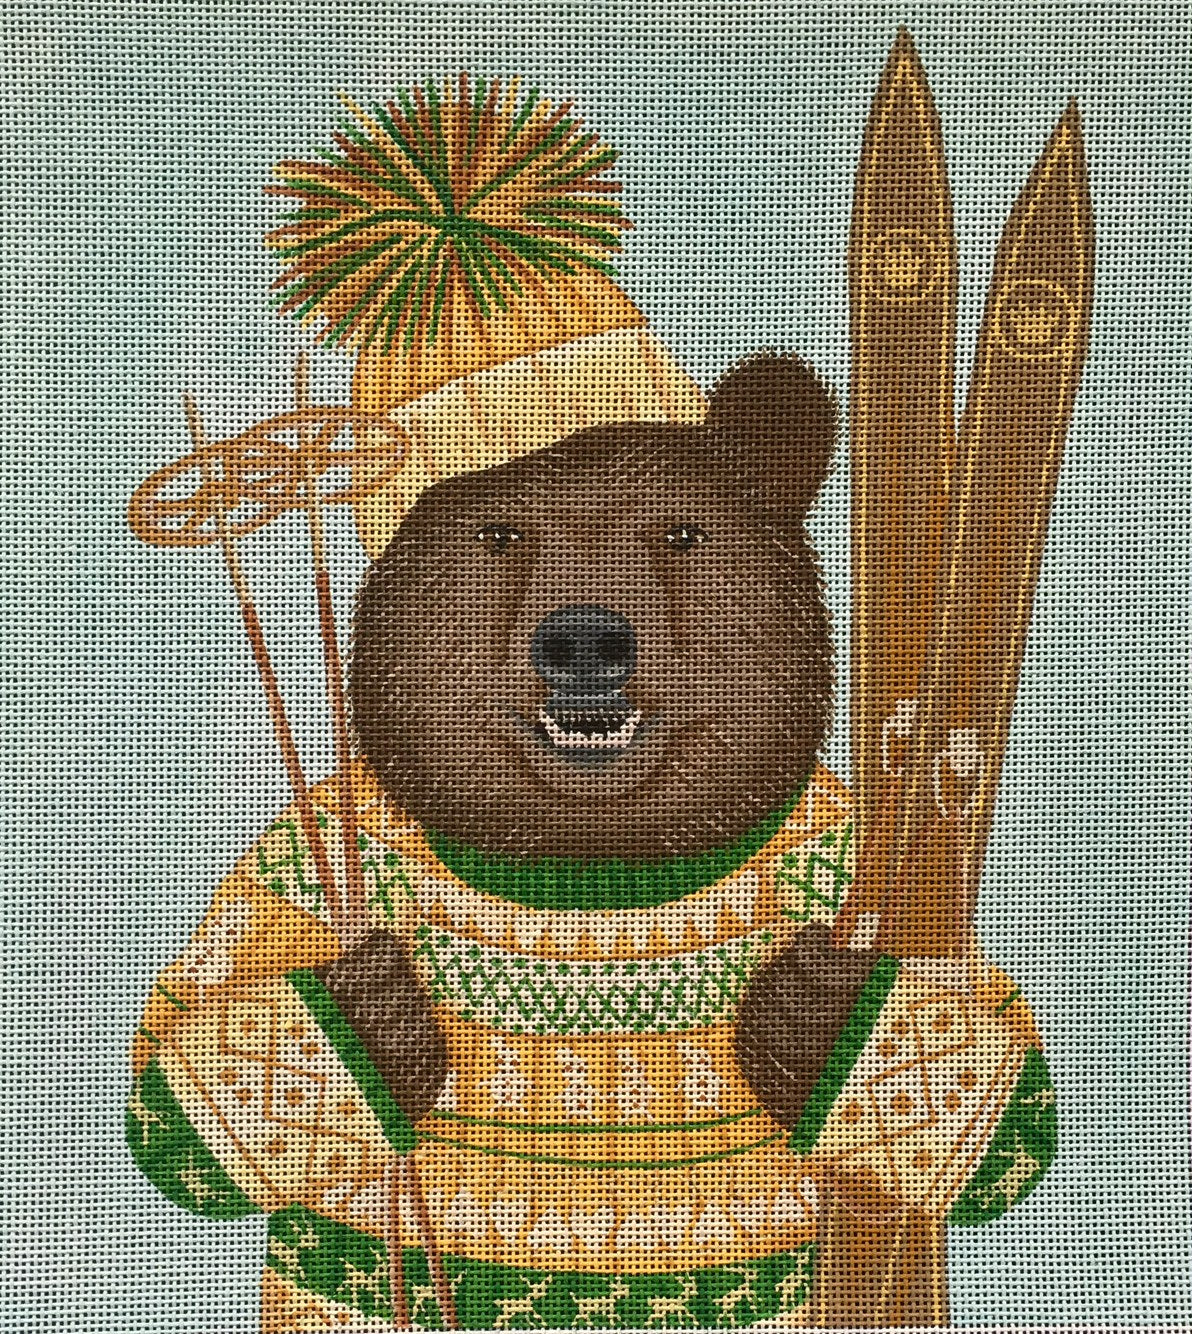 Fab Funky whimsical needlepoint canvas of a brown bear wearing a fair isle sweater and a pom pom beanie hat holding skis and ski poles